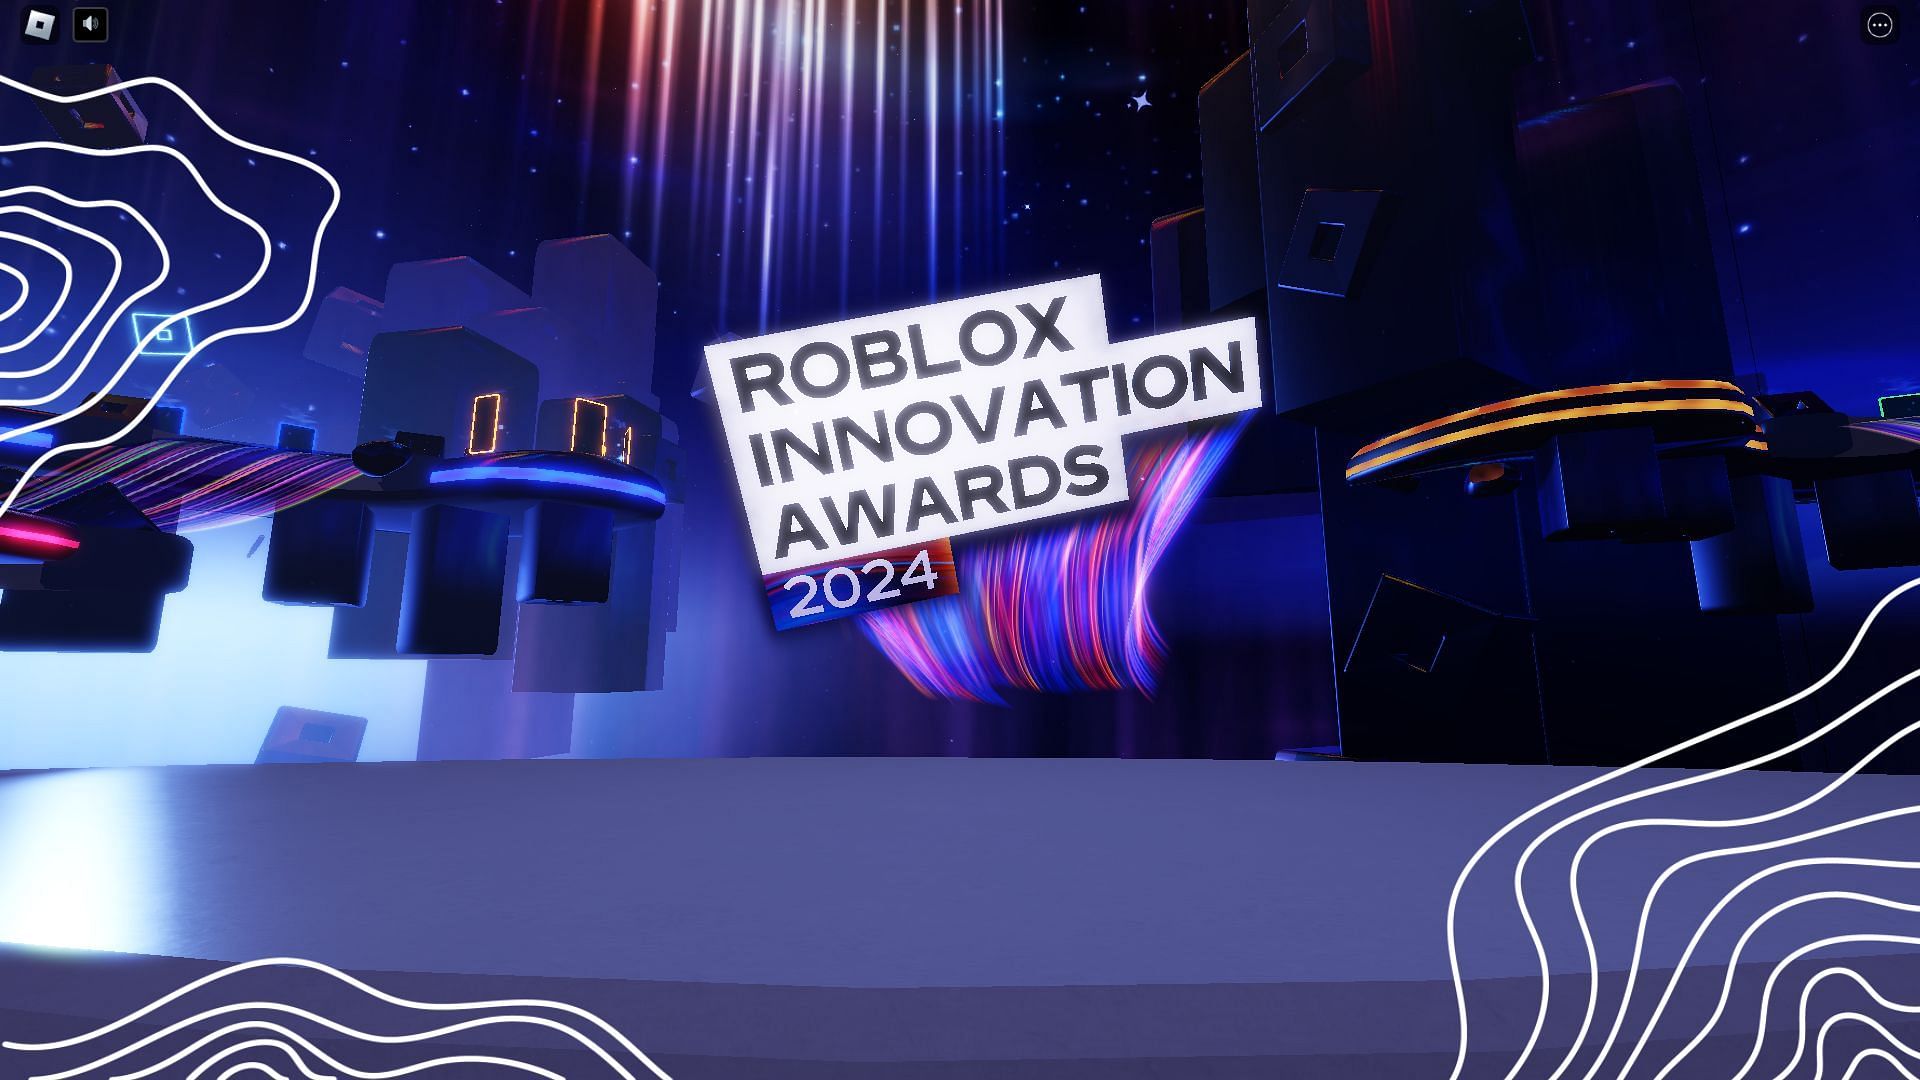 How to cast a vote in the Roblox Innovation Awards 2024